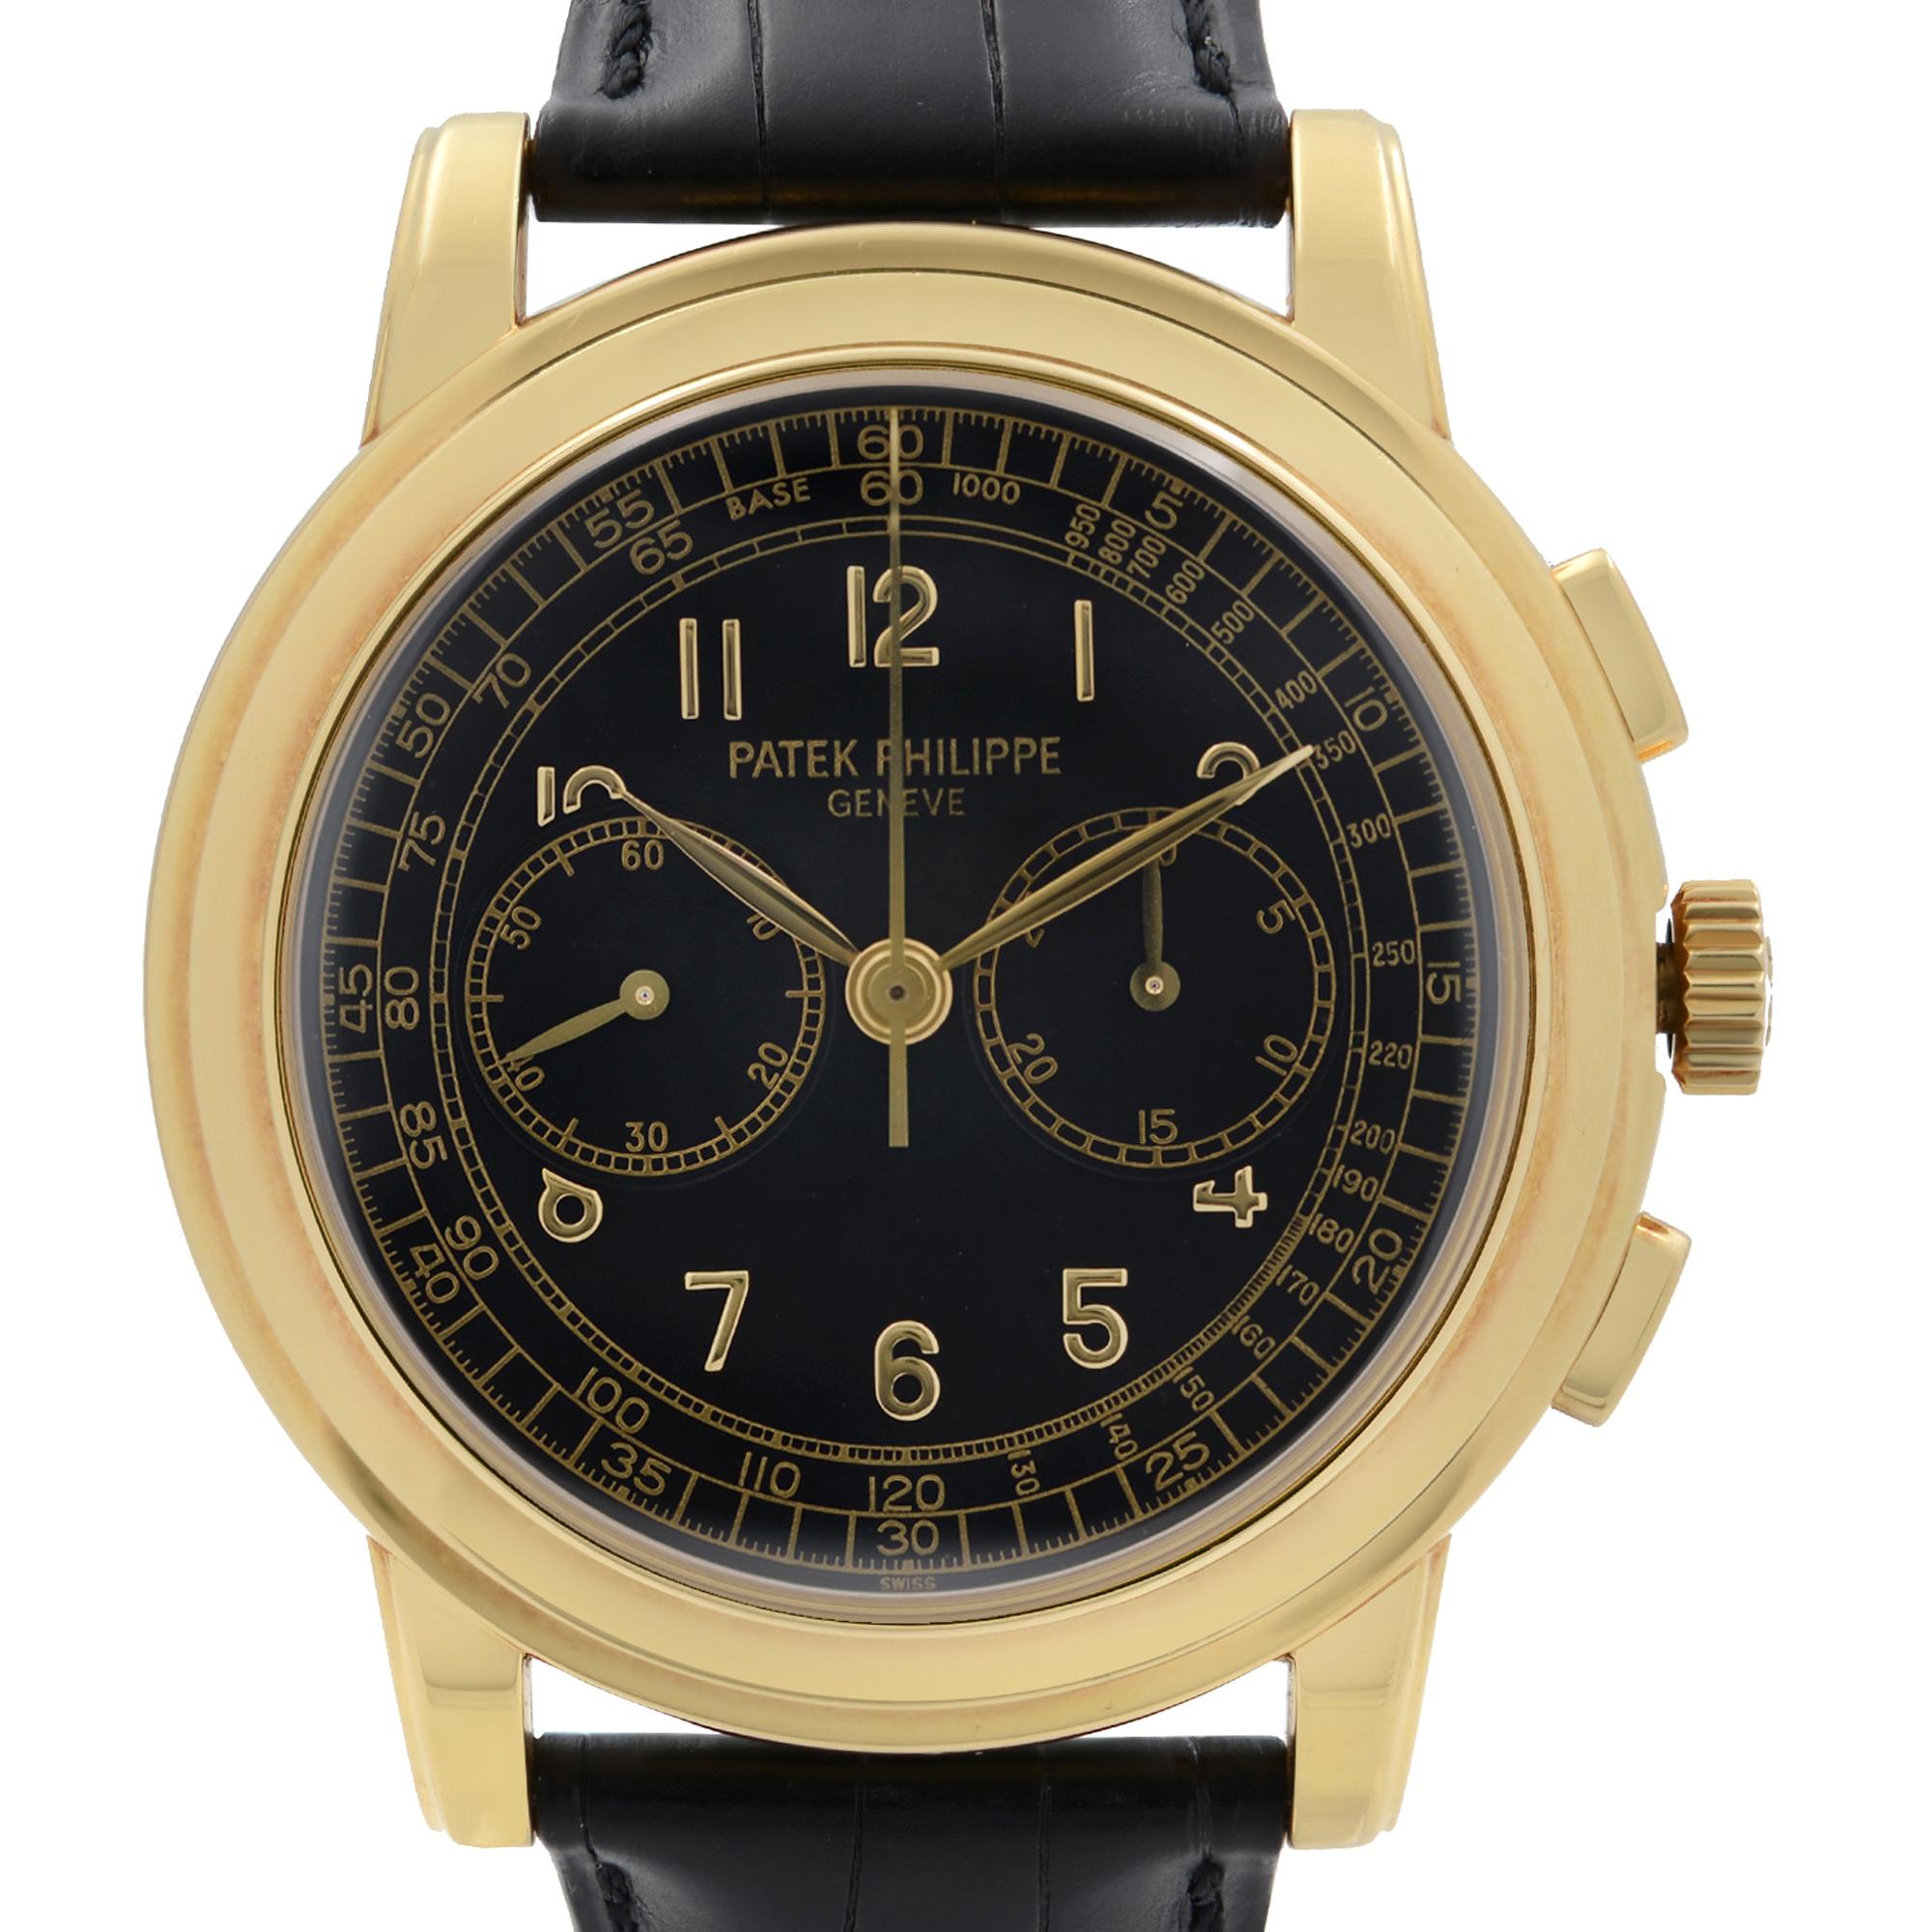 Pre Owned Patek Philippe Complications Chronograph Yellow Gold Hand Wind Watch 5070J-001. This Beautiful Timepiece is Powered by Mechanical (Manual) Movement And Features: Round 18k Yellow Gold Case with a Black Leather Strap, Fixed 18k Yellow Gold